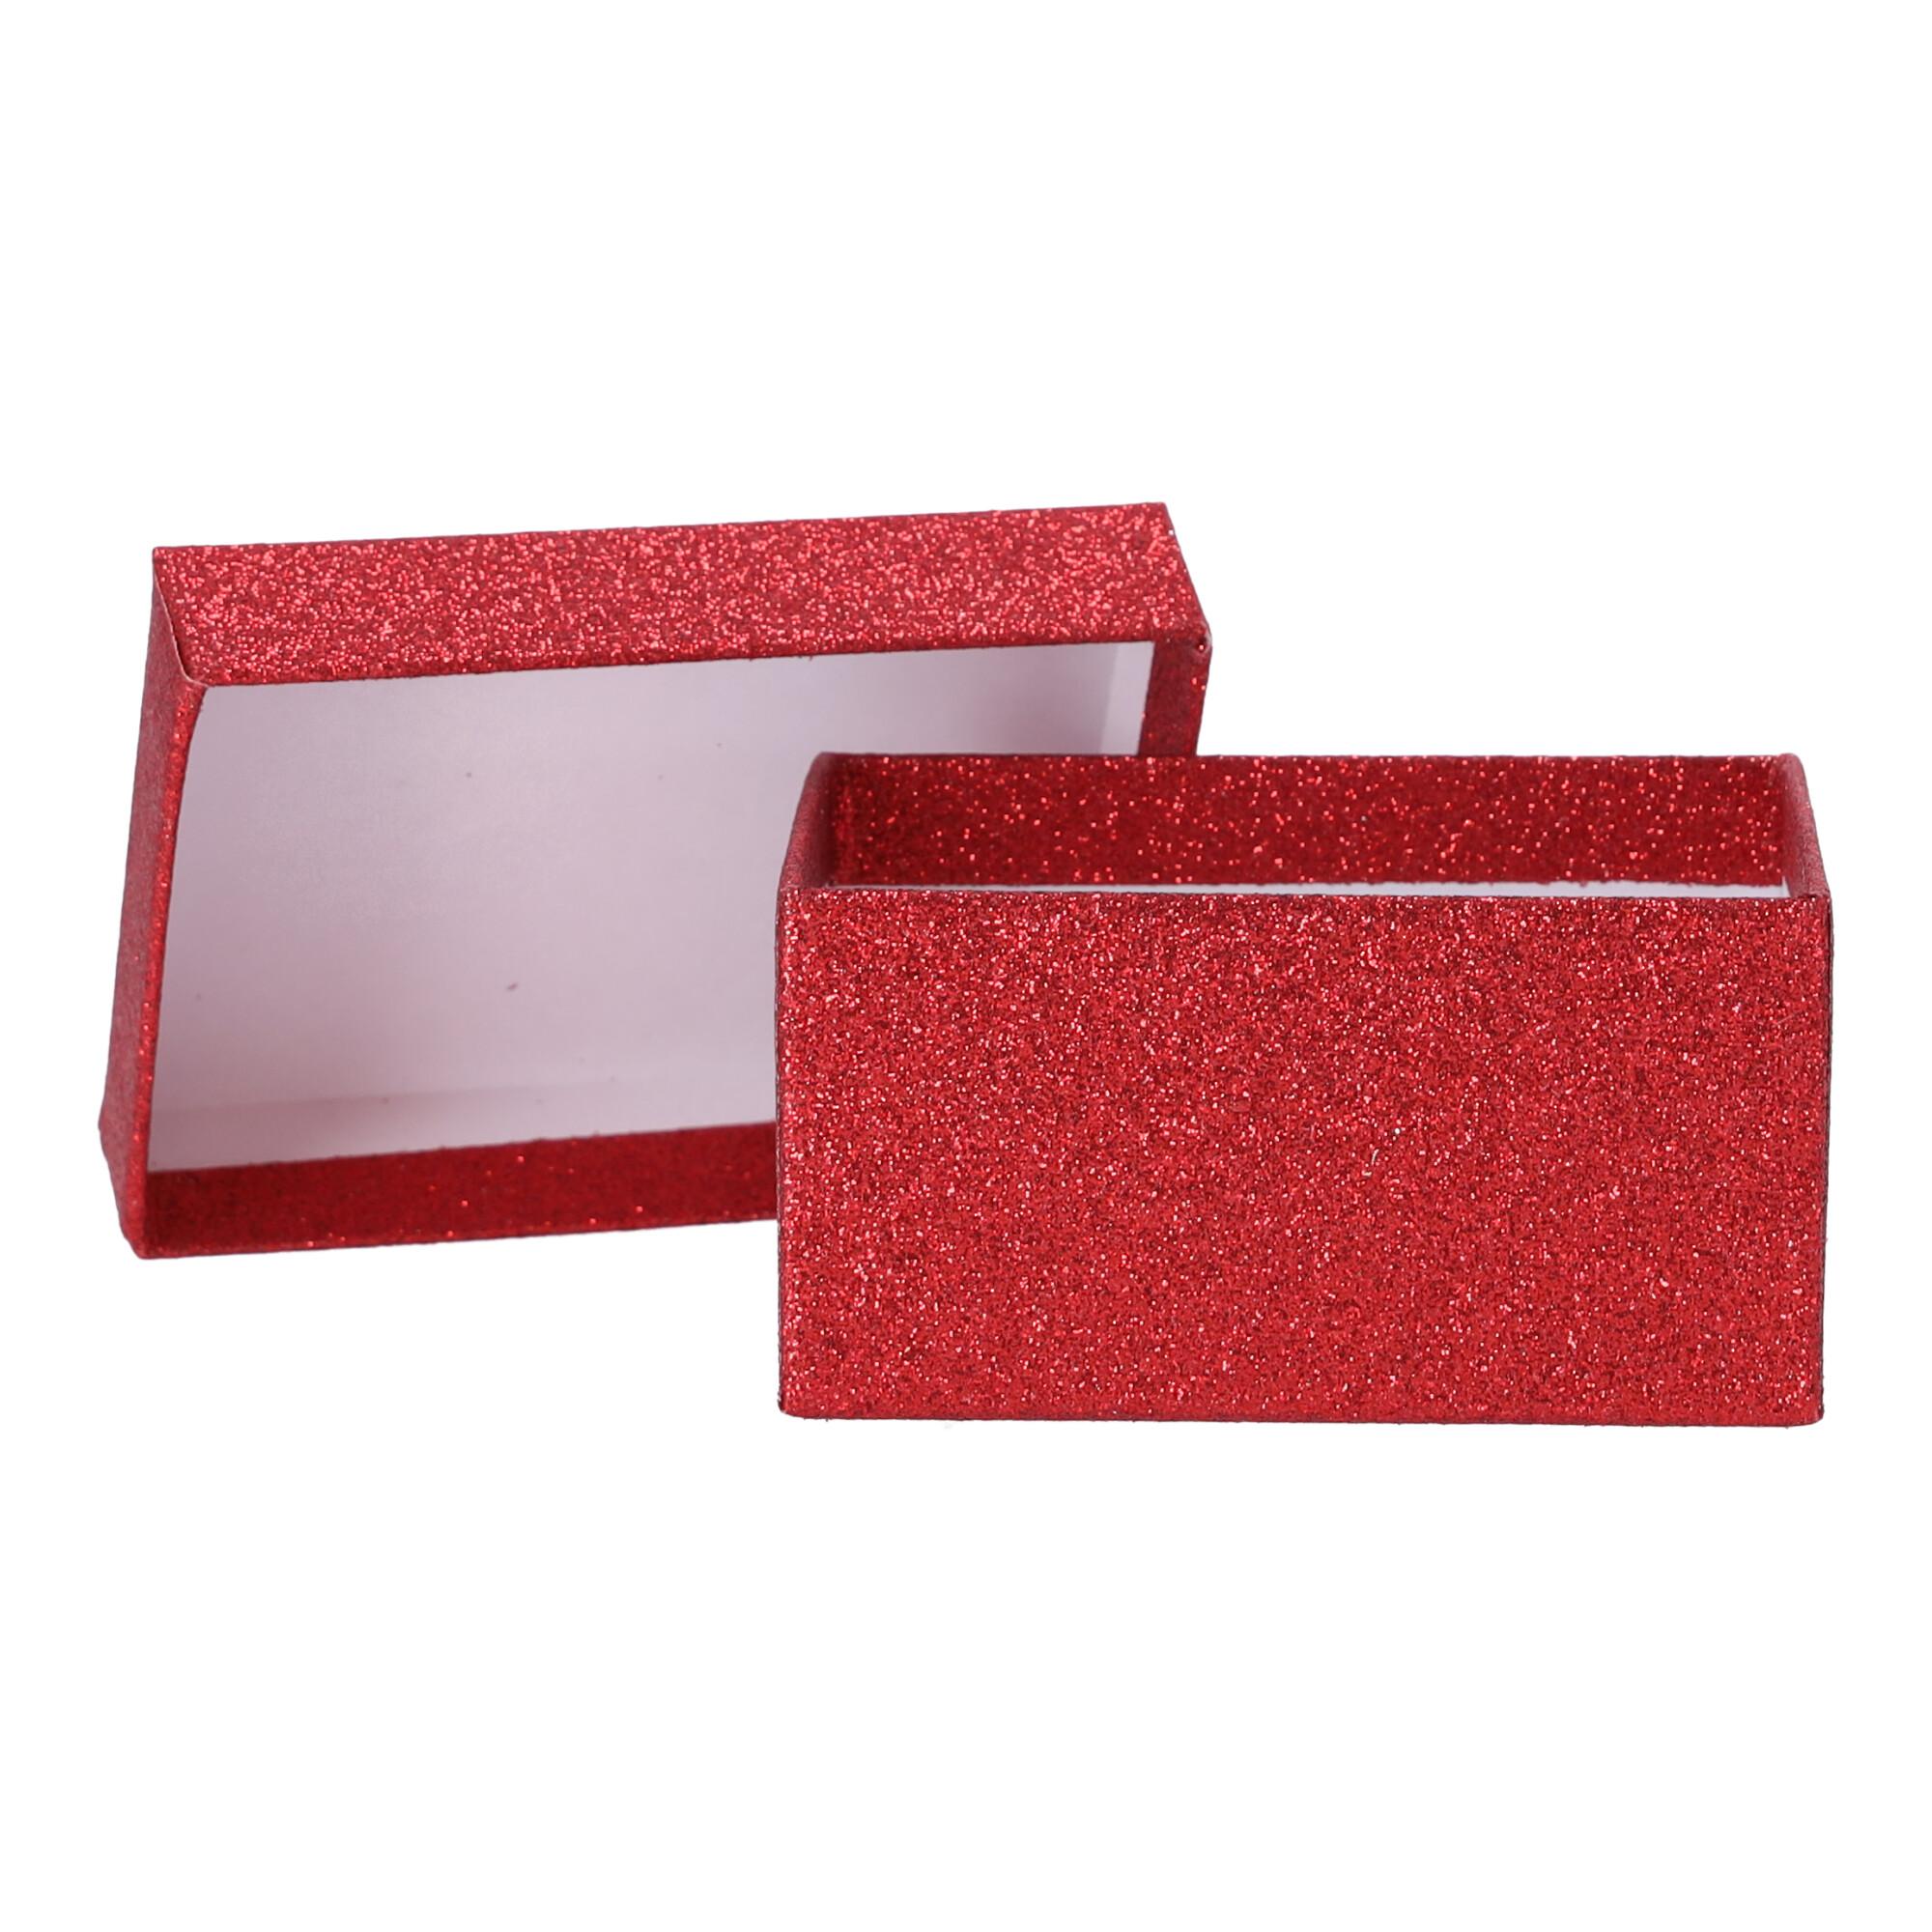 Small gift box 11x7.5x5.5 cm - Red